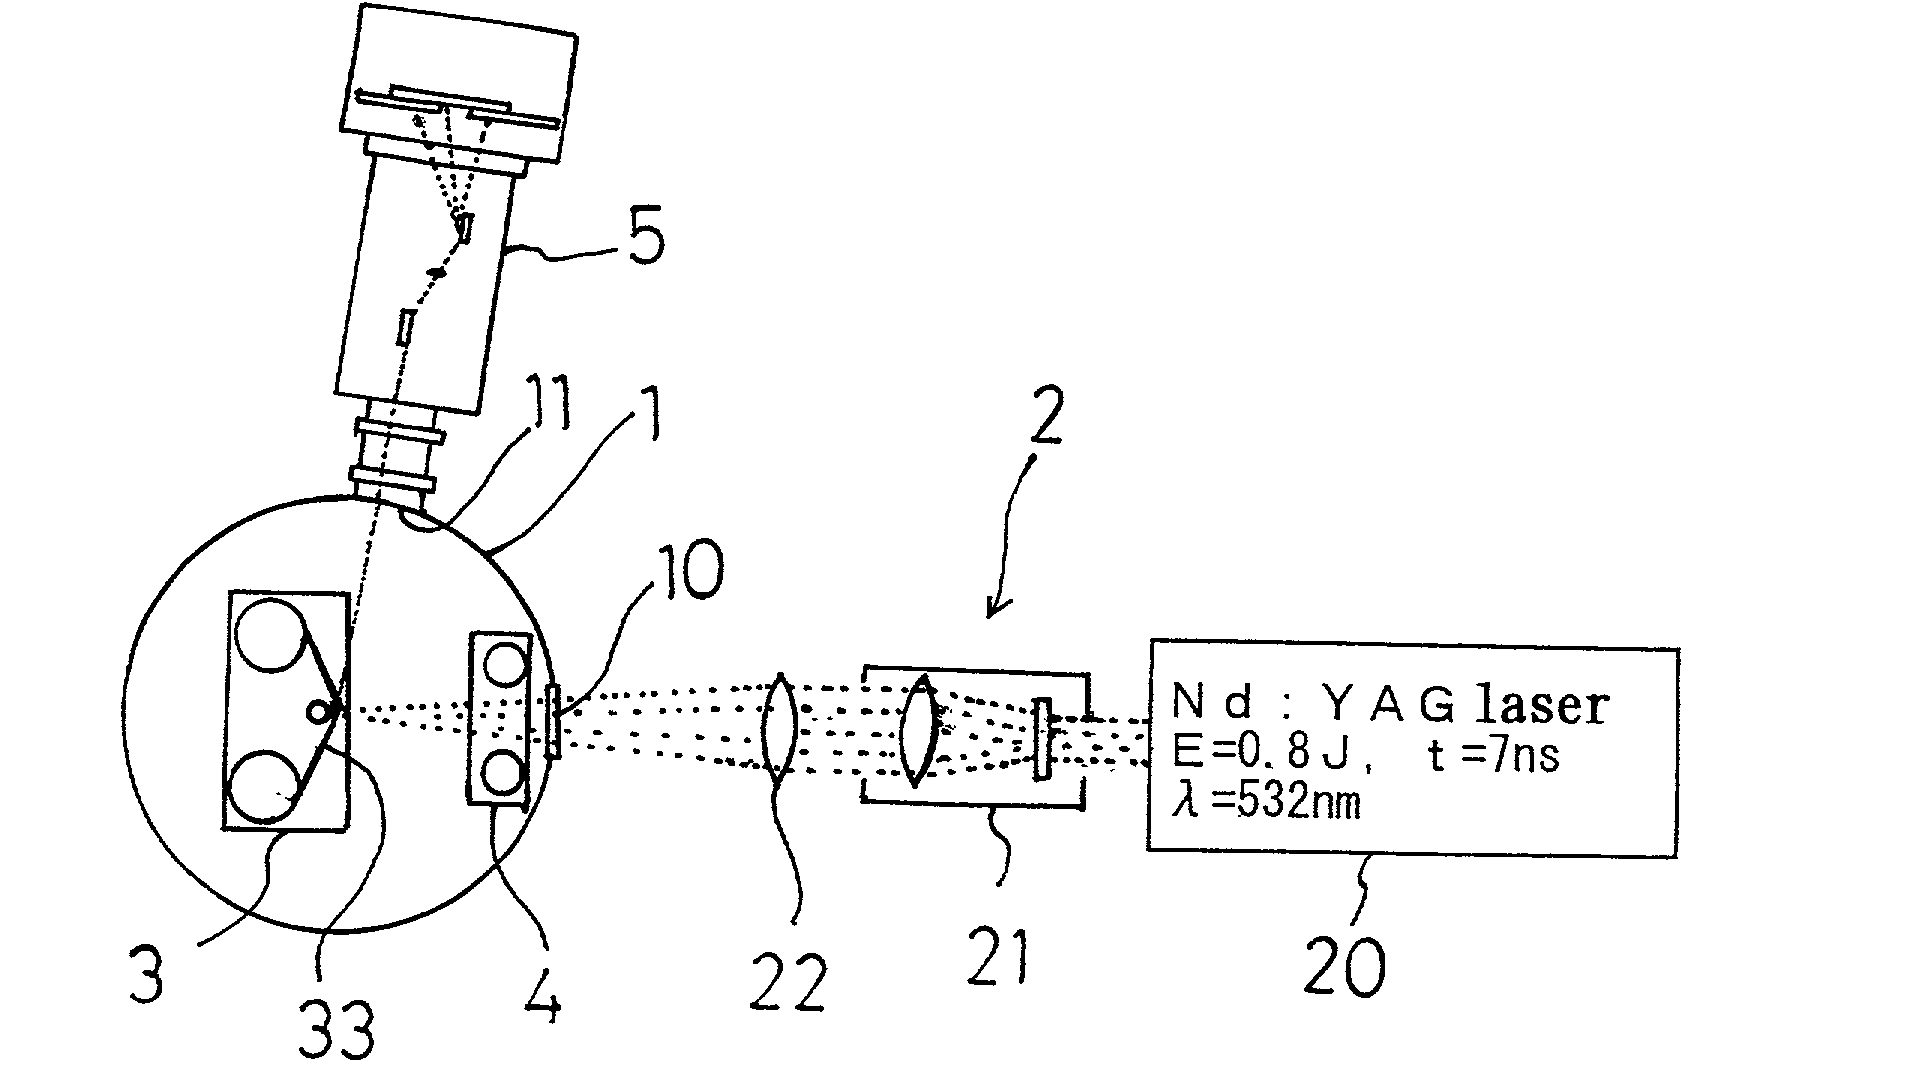 Laser plasma EUV light source apparatus and target used therefor